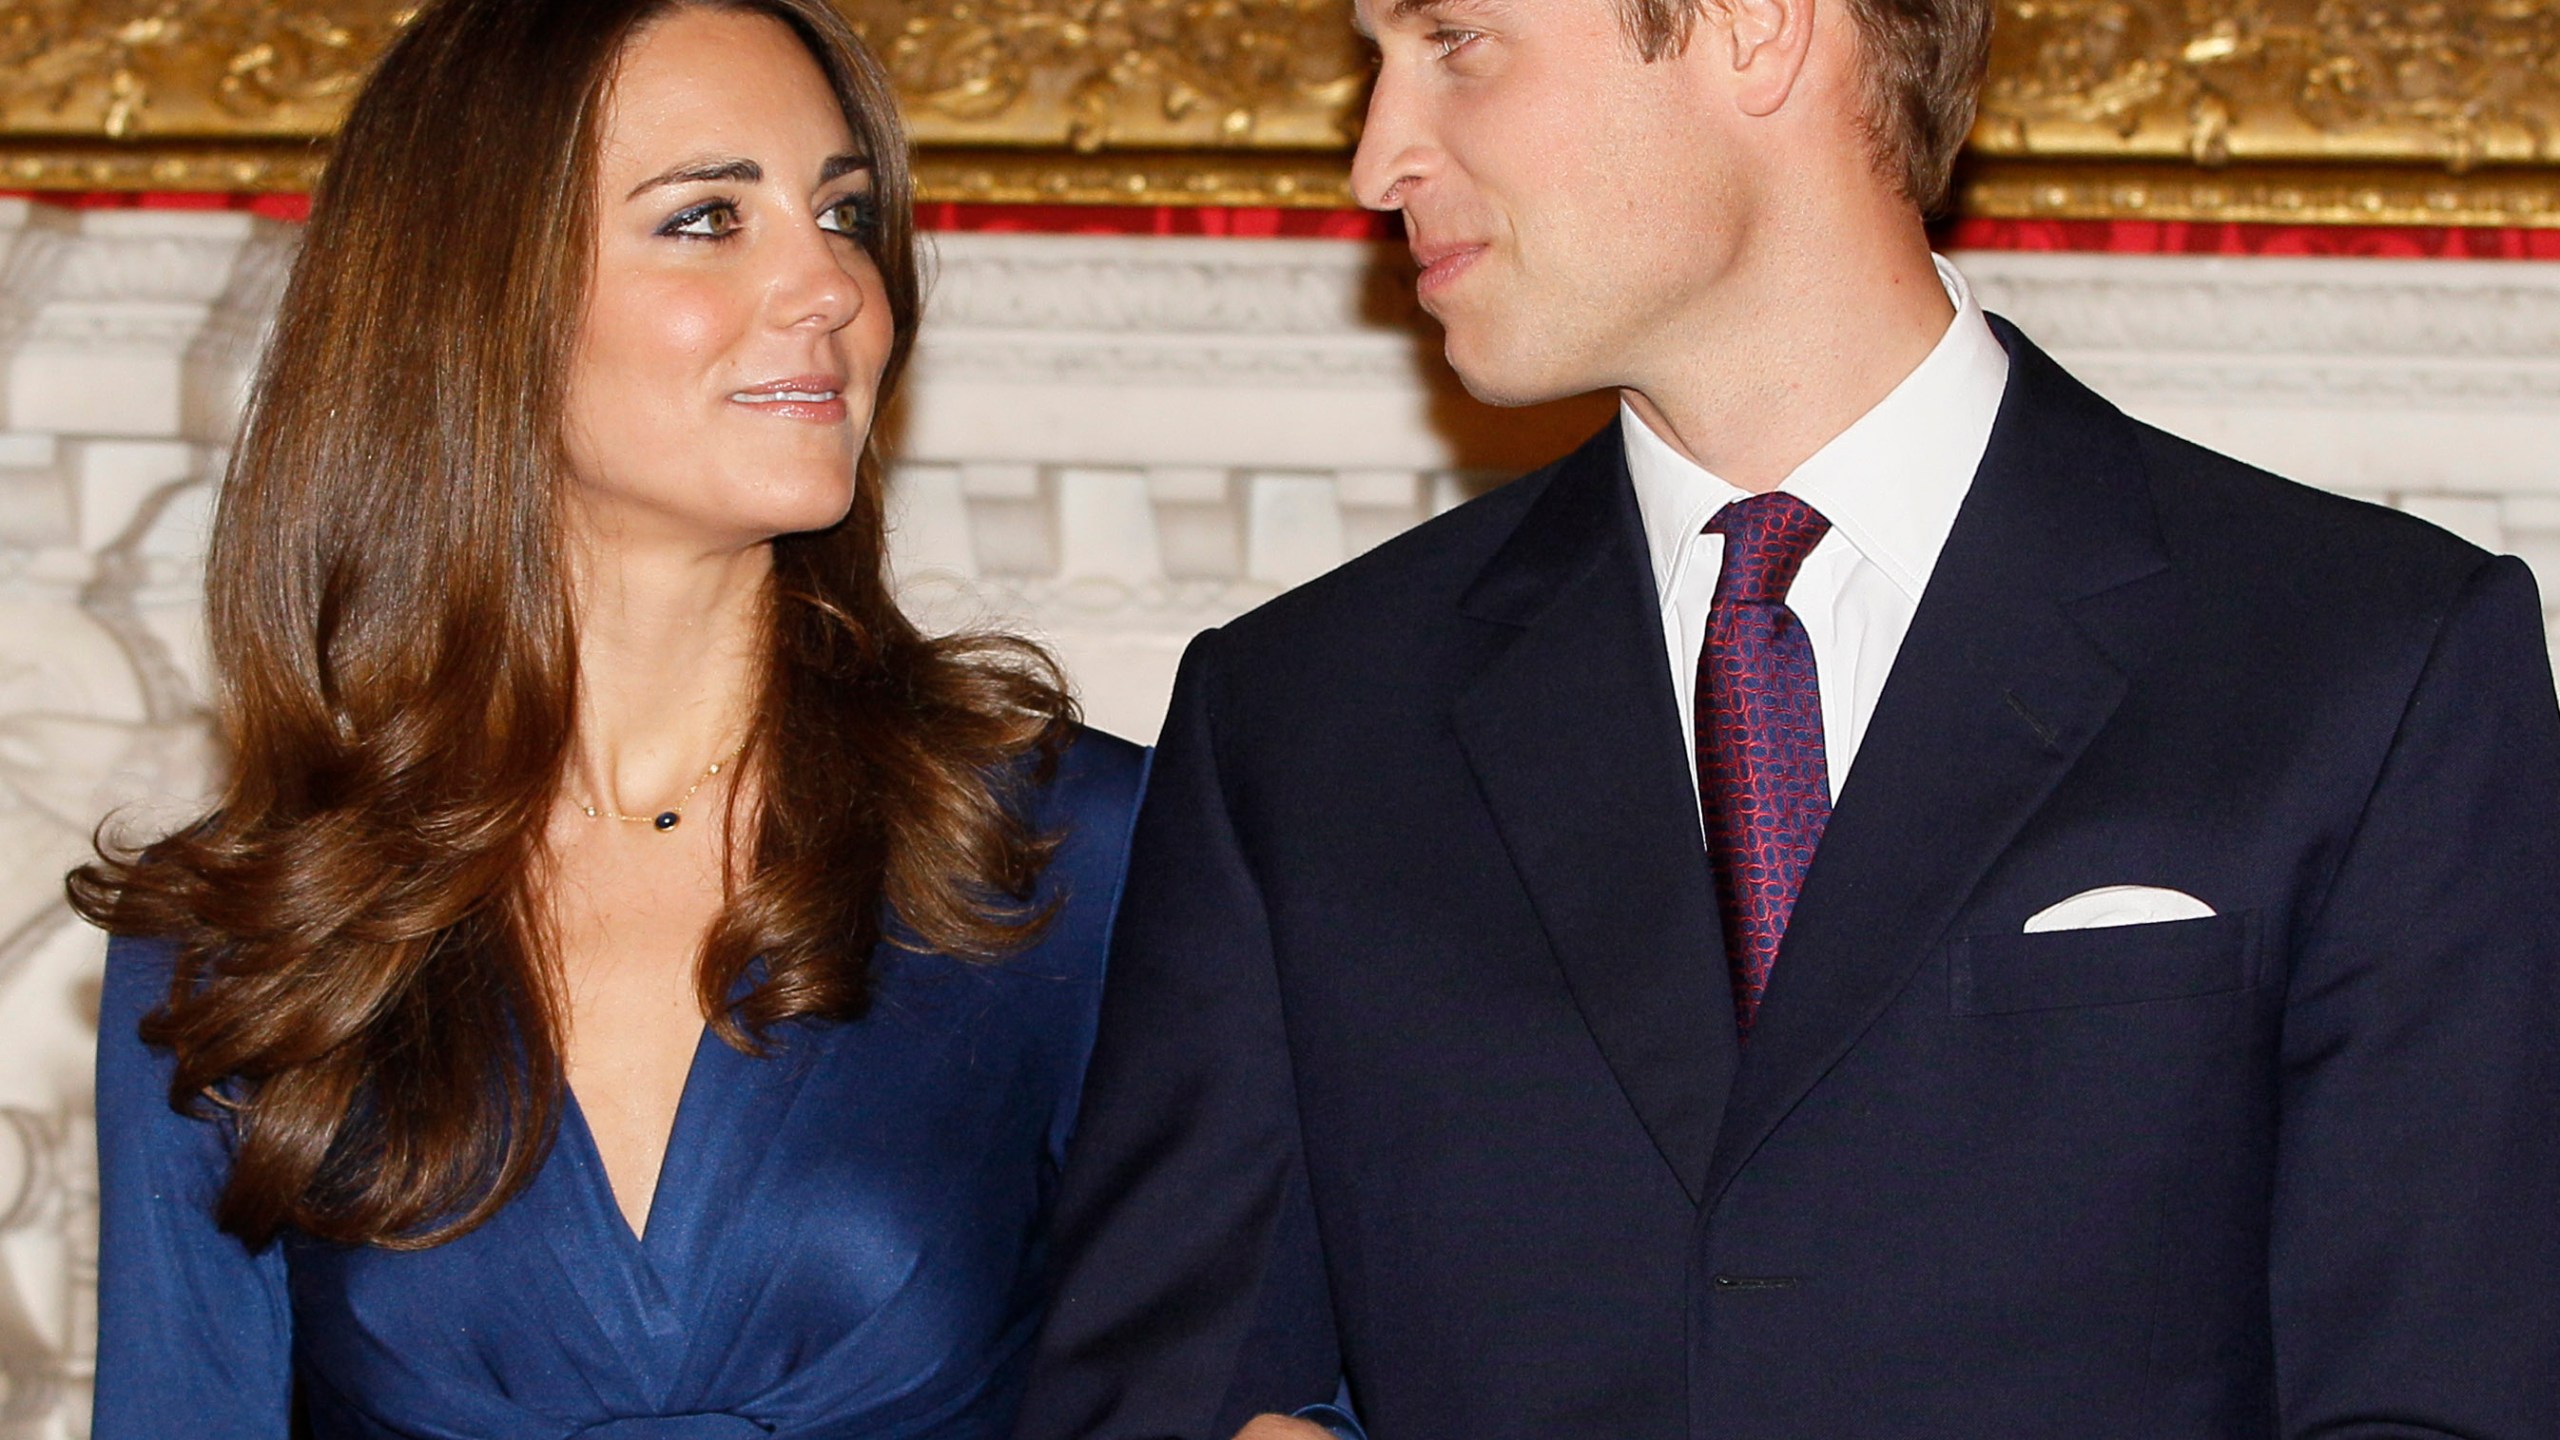 FILE - Britain's Prince William and his then fiancee Kate Middleton pose for the media at St. James's Palace in London, Tuesday Nov. 16, 2010, after they announced their engagement. (AP Photo/Kirsty Wigglesworth, File)